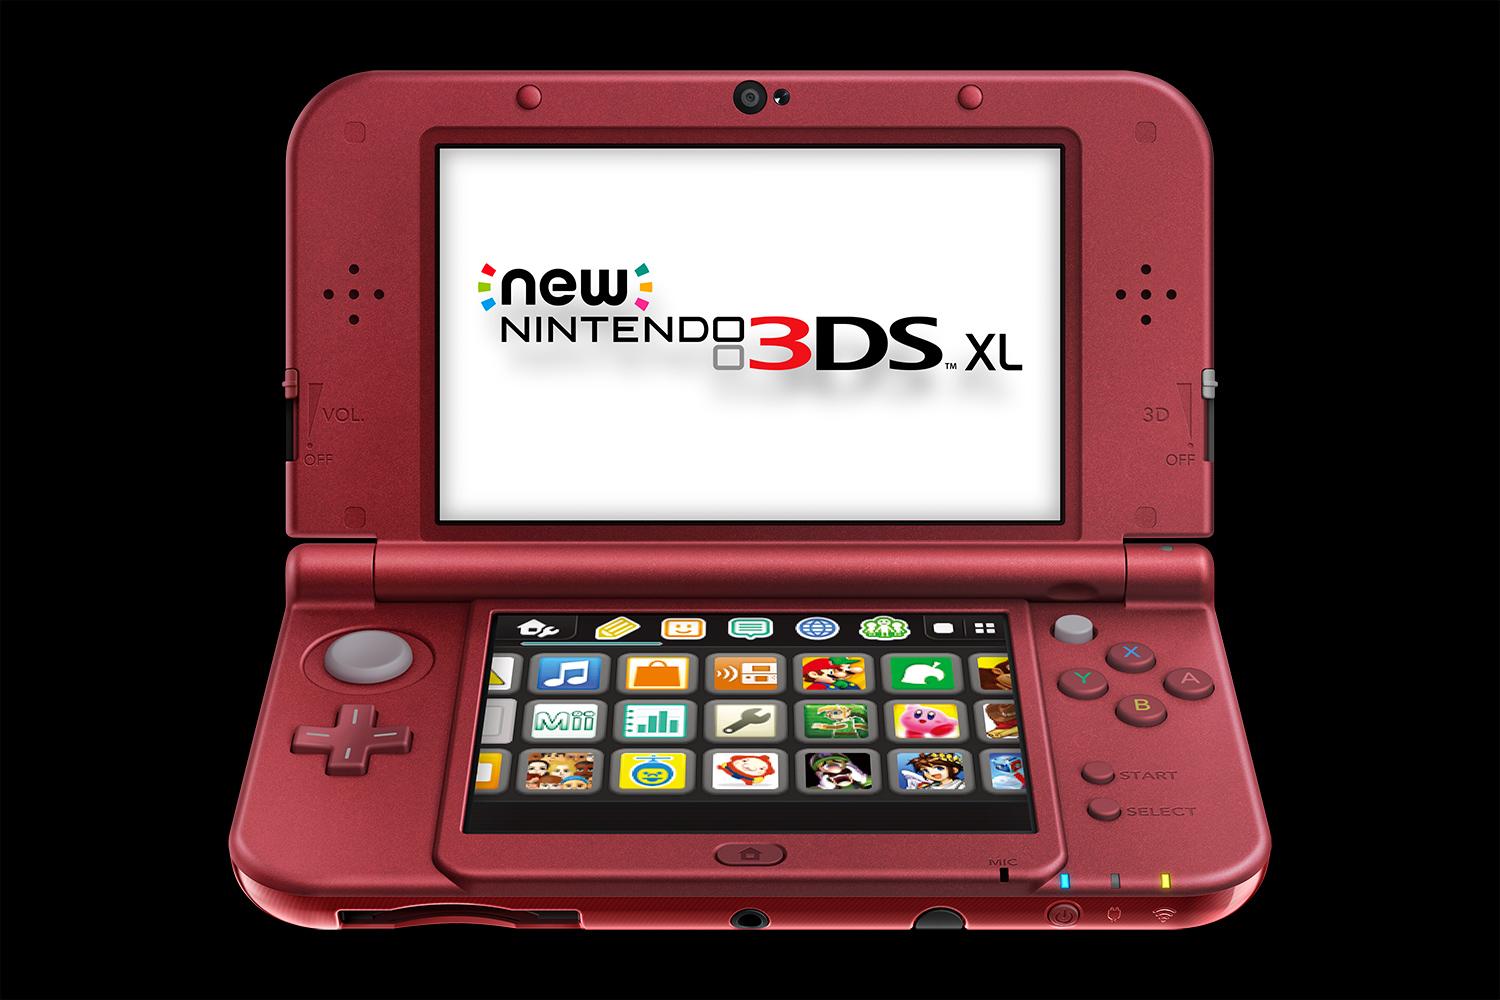 New Nintendo 3DS XL review | Handheld gaming console | Digital Trends